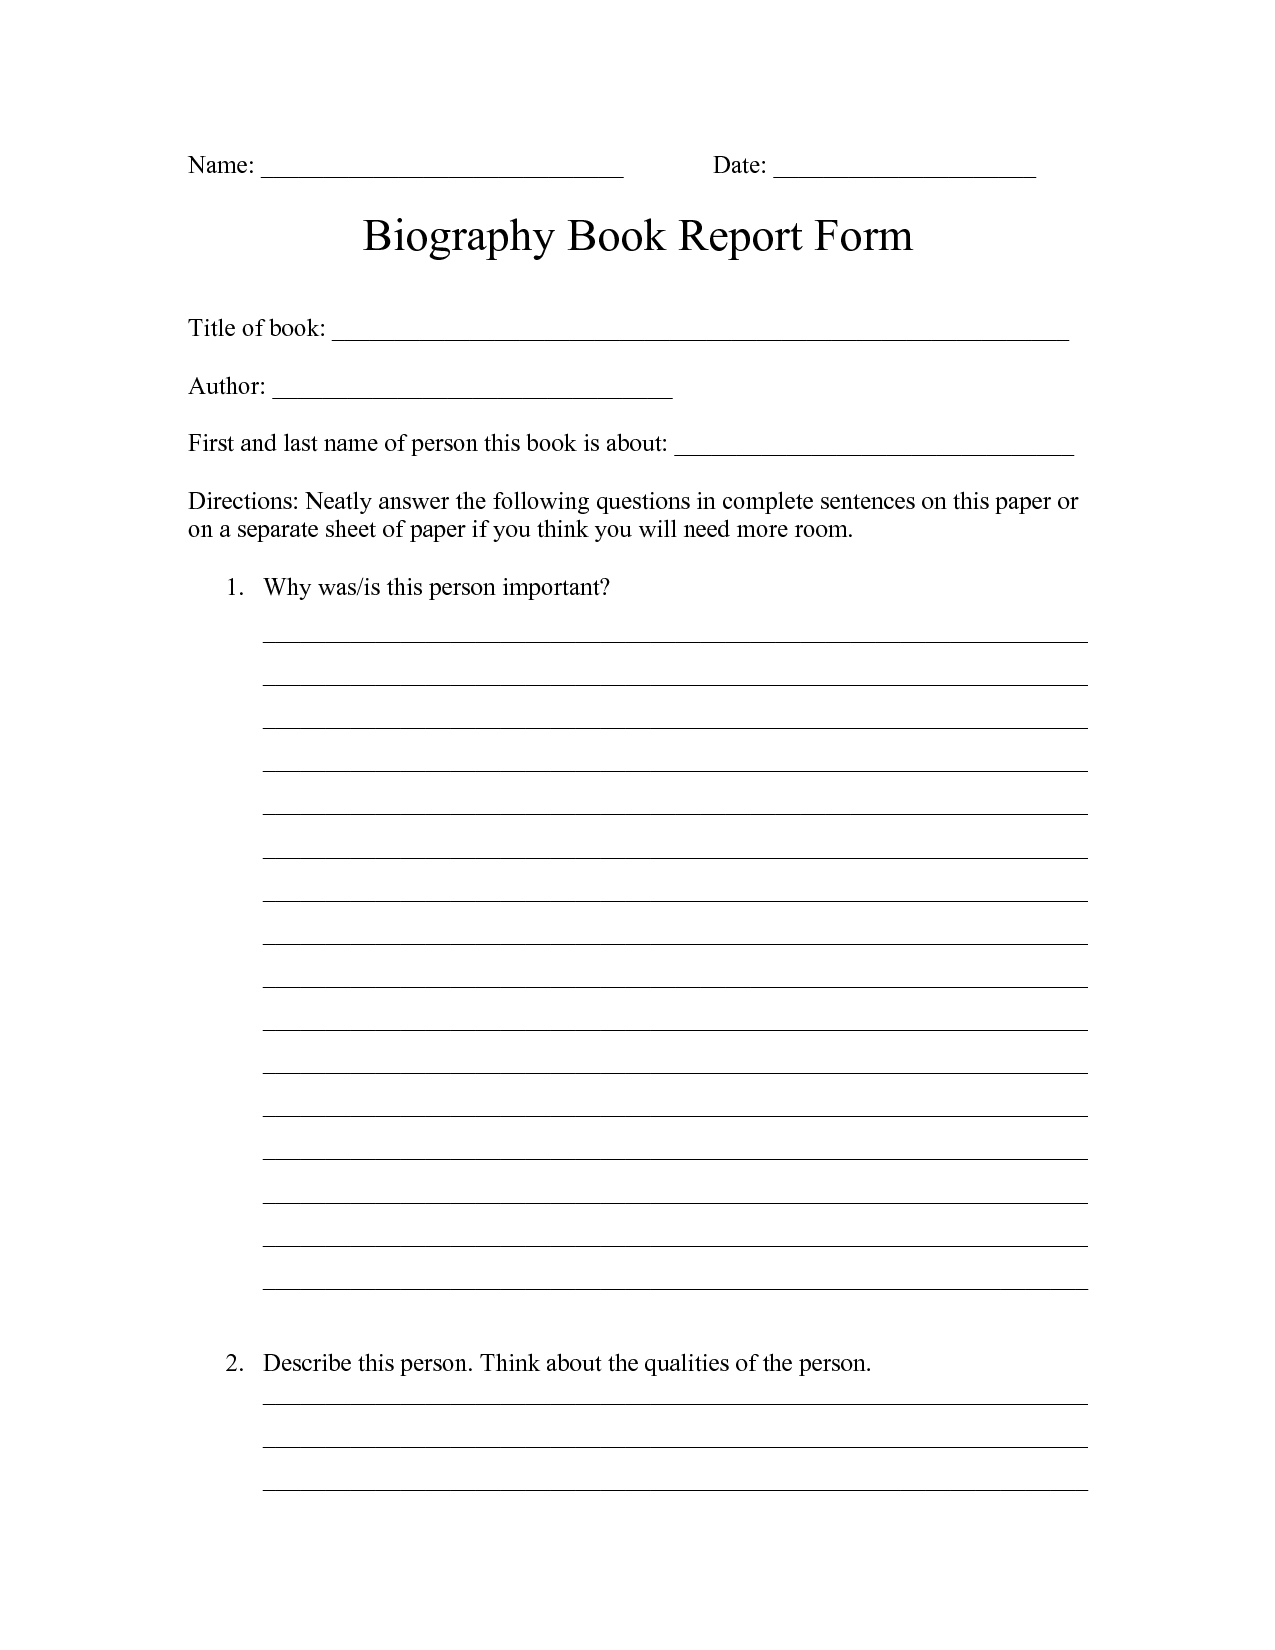 Elementary Book Report Worksheet | Printable Worksheets And In Biography Book Report Template